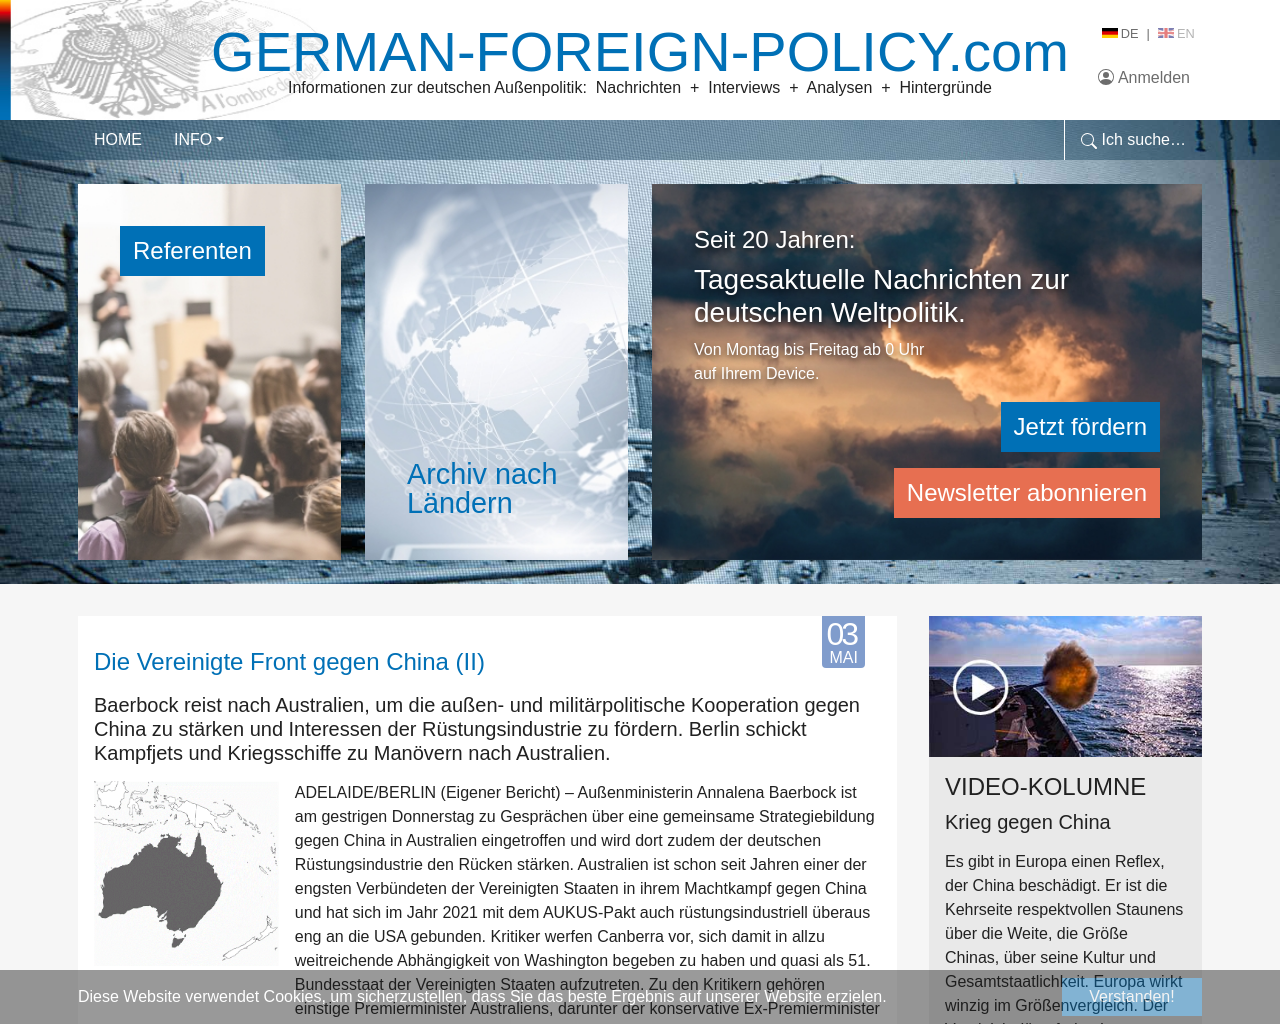 german-foreign-policy.com